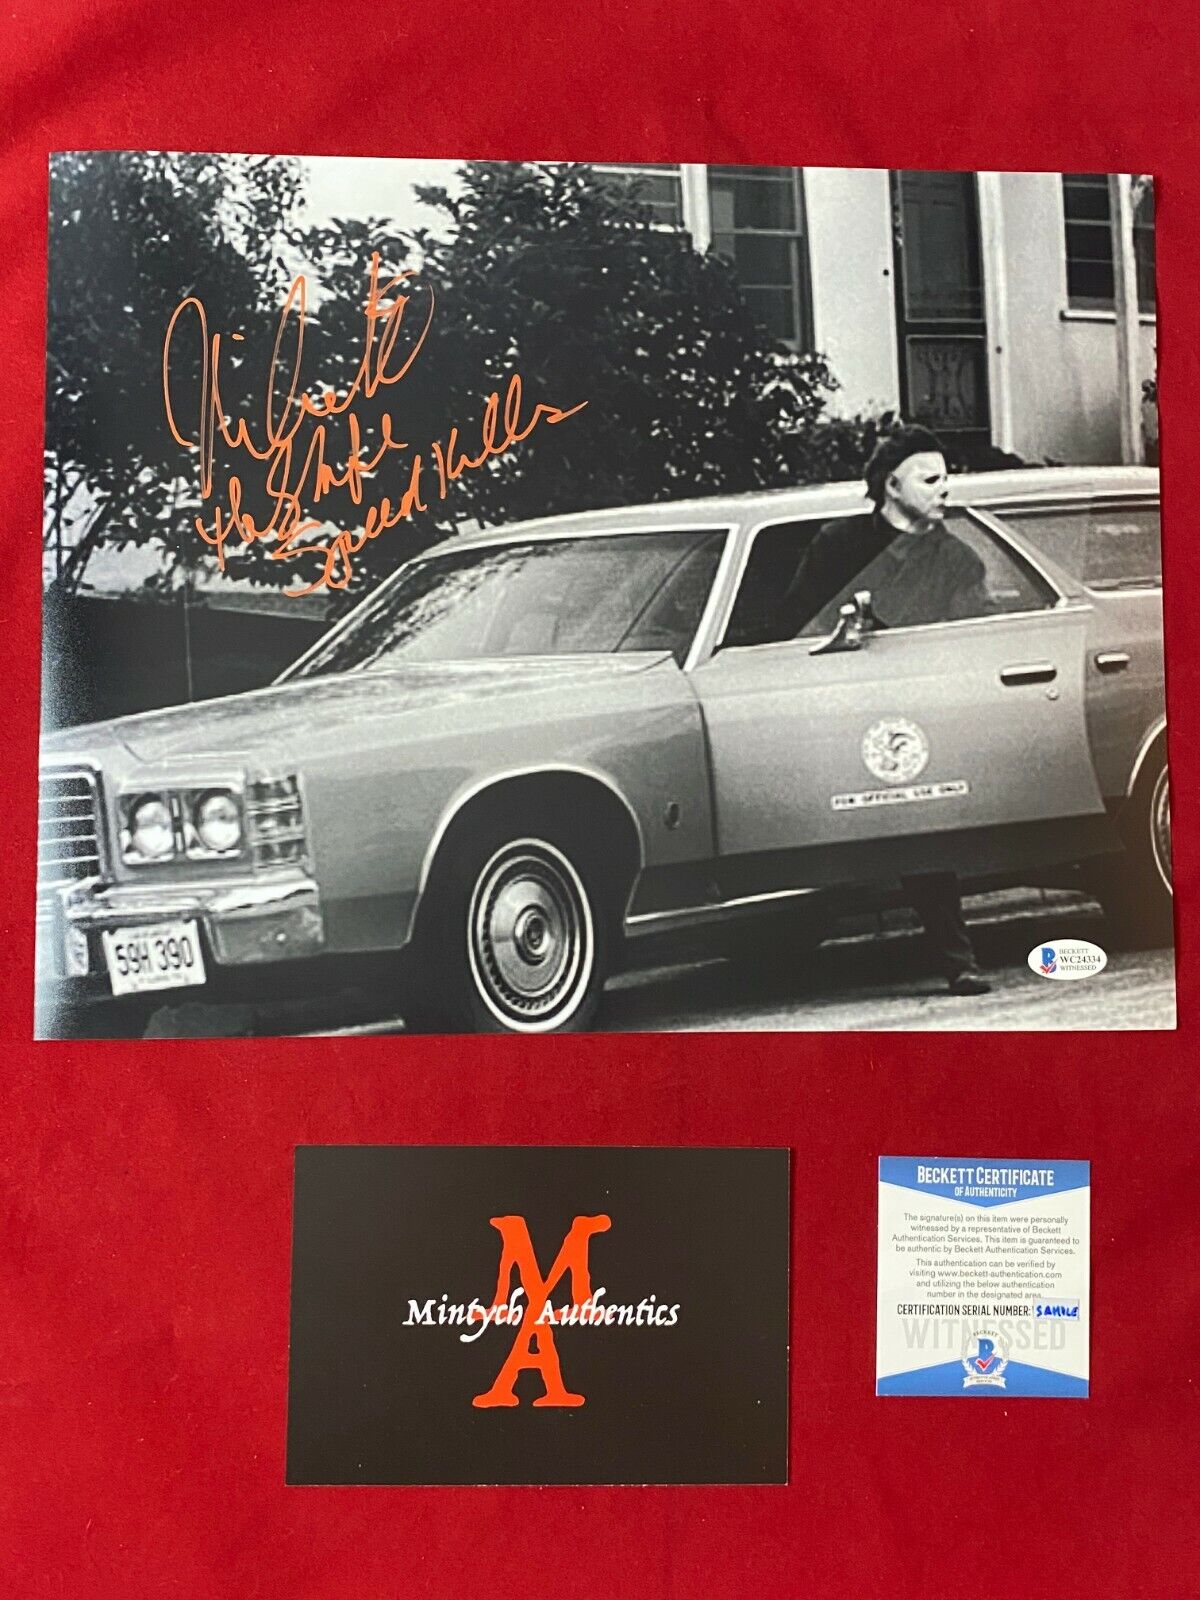 NICK CASTLE AUTOGRAPHED SIGNED 11x14 Photo Poster painting! HALLOWEEN MICHAEL MYERS! BECKETT COA